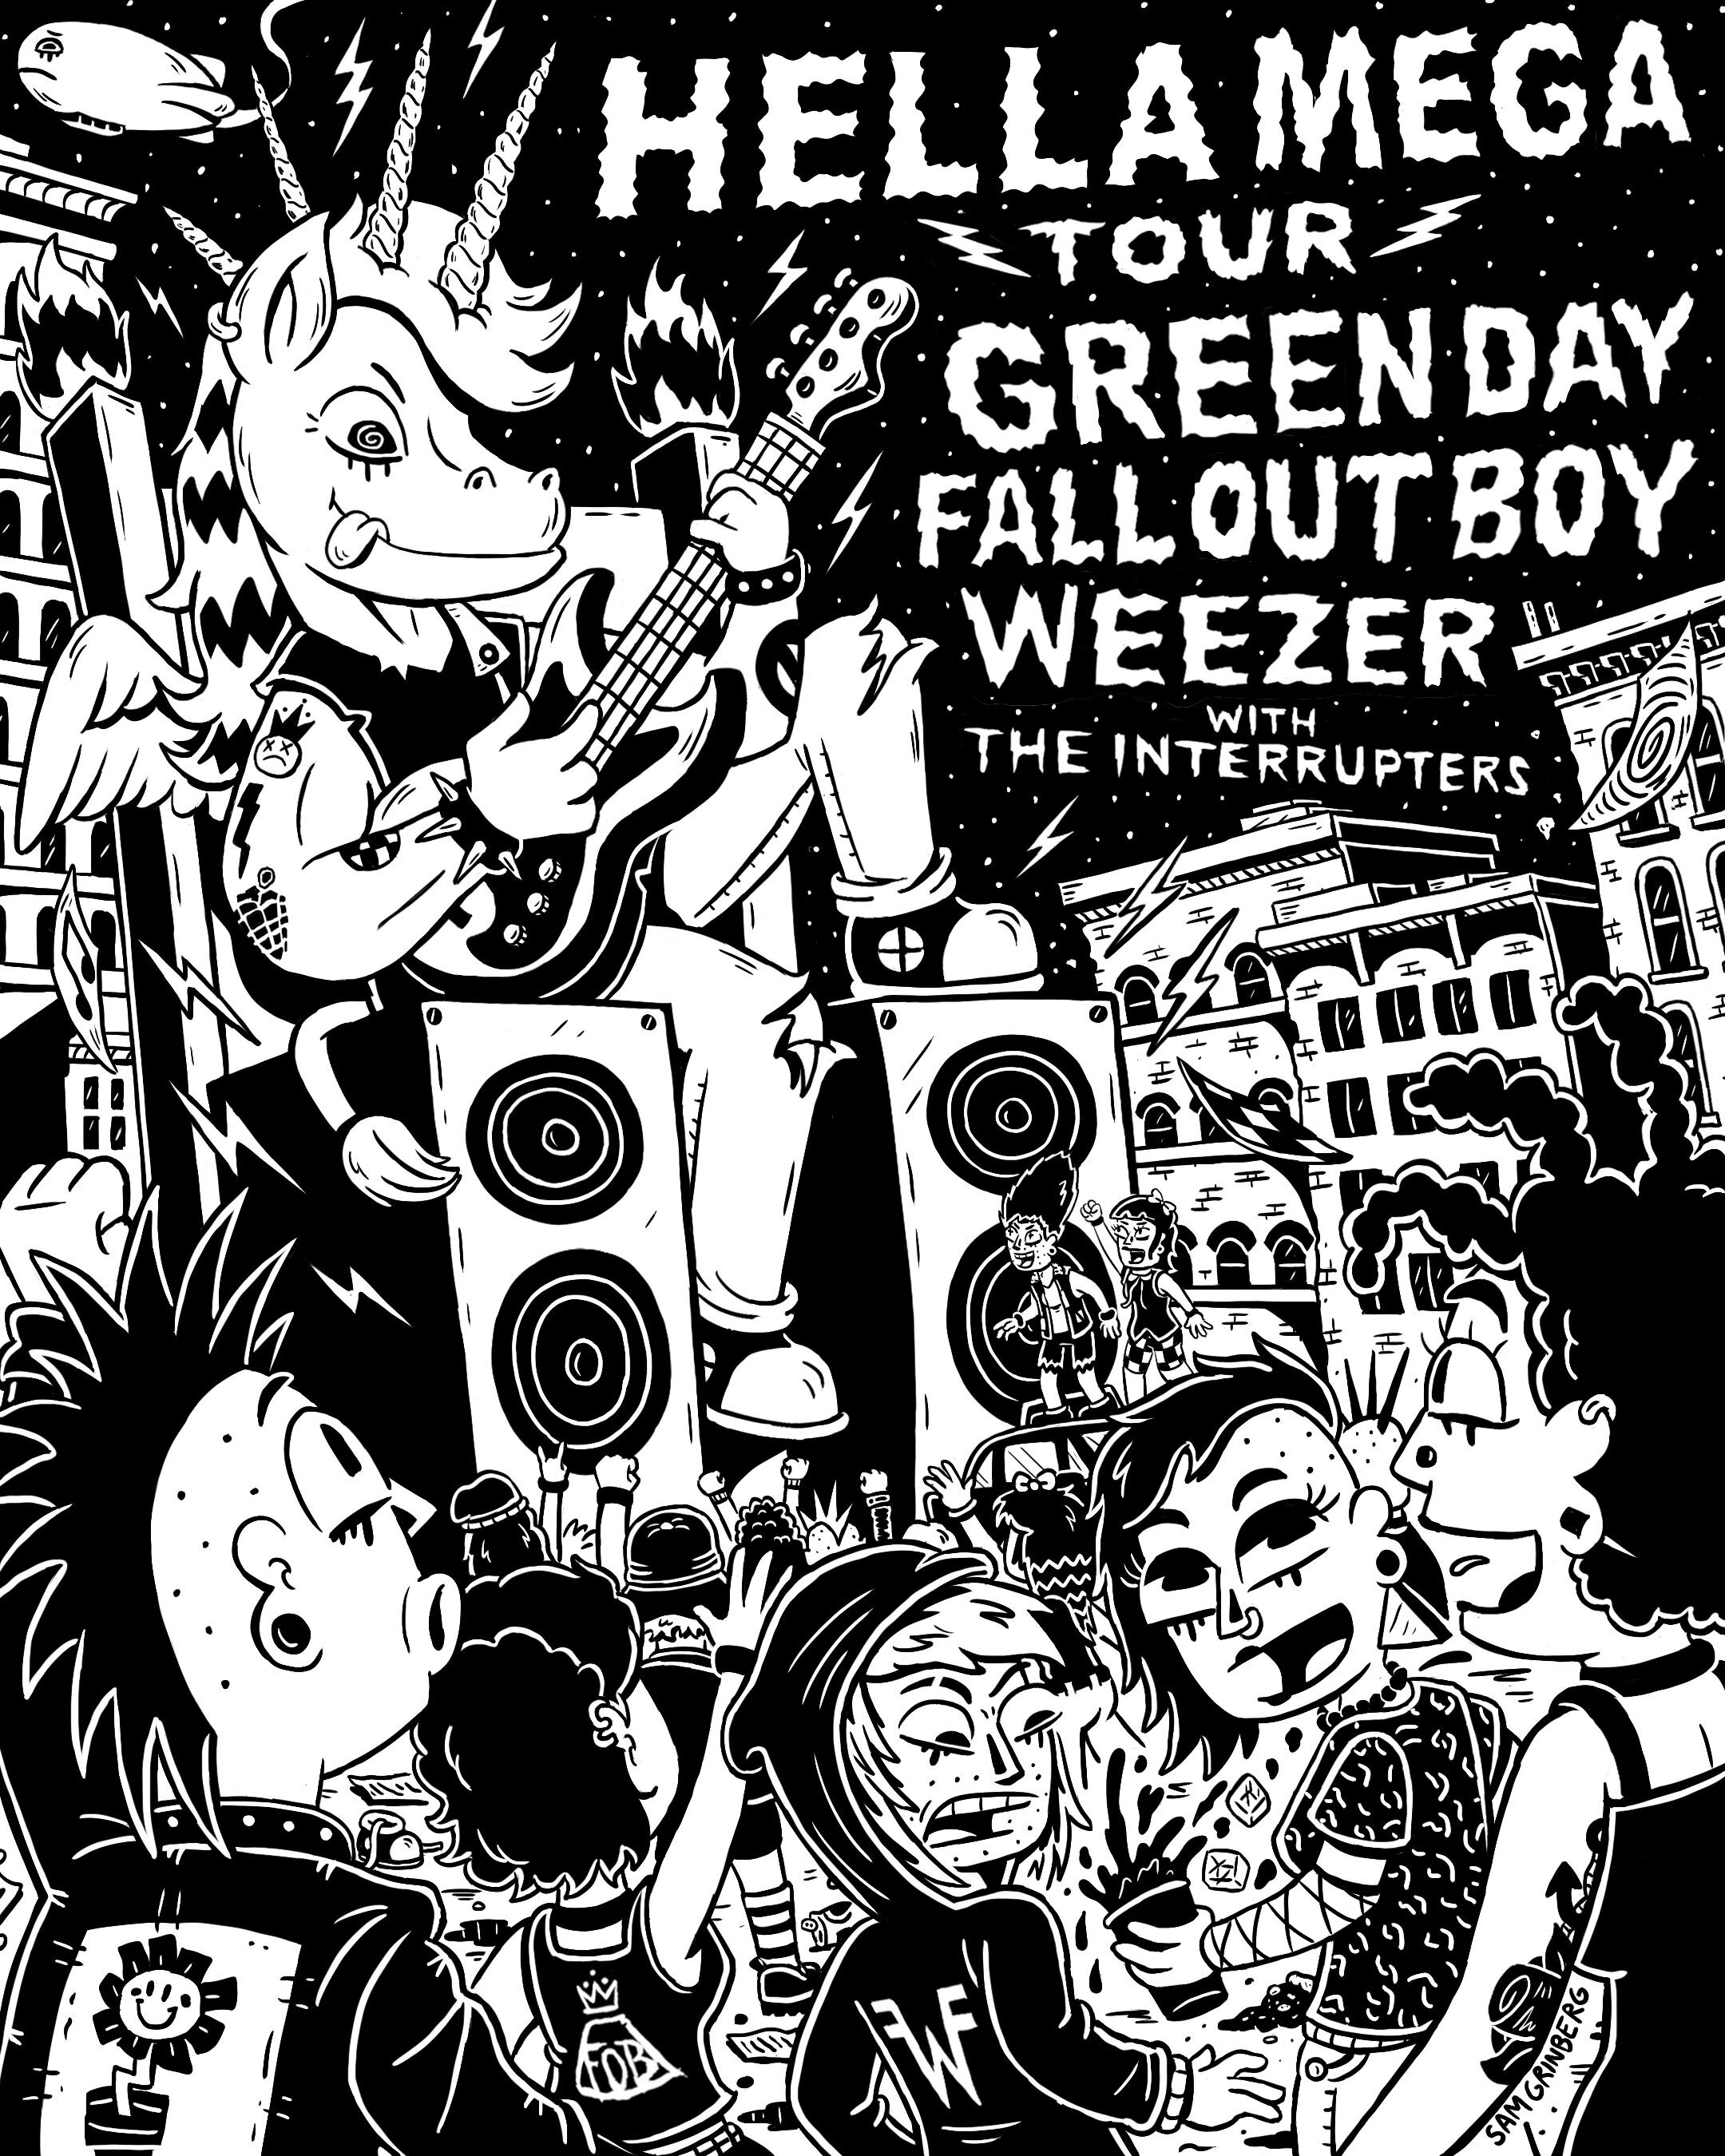  Created this illustration for Hella Mega Tour, featuring Green Day, Fall Out Boy, Weezer, and The Interrupters 